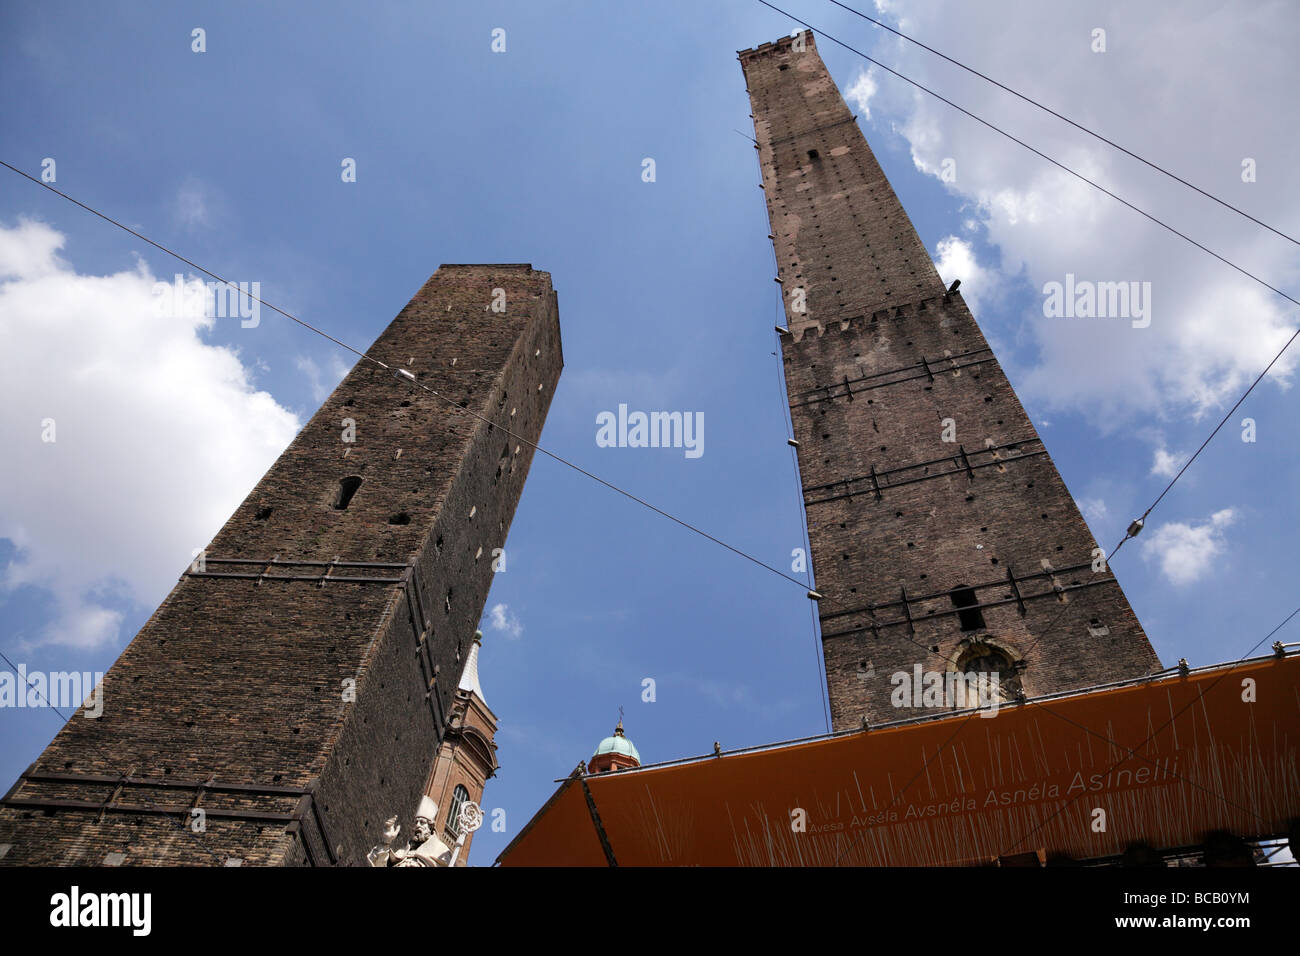 looking up at the two towers with the statue of st petronius by brunelli in piazza ravegnana bologna italy Stock Photo